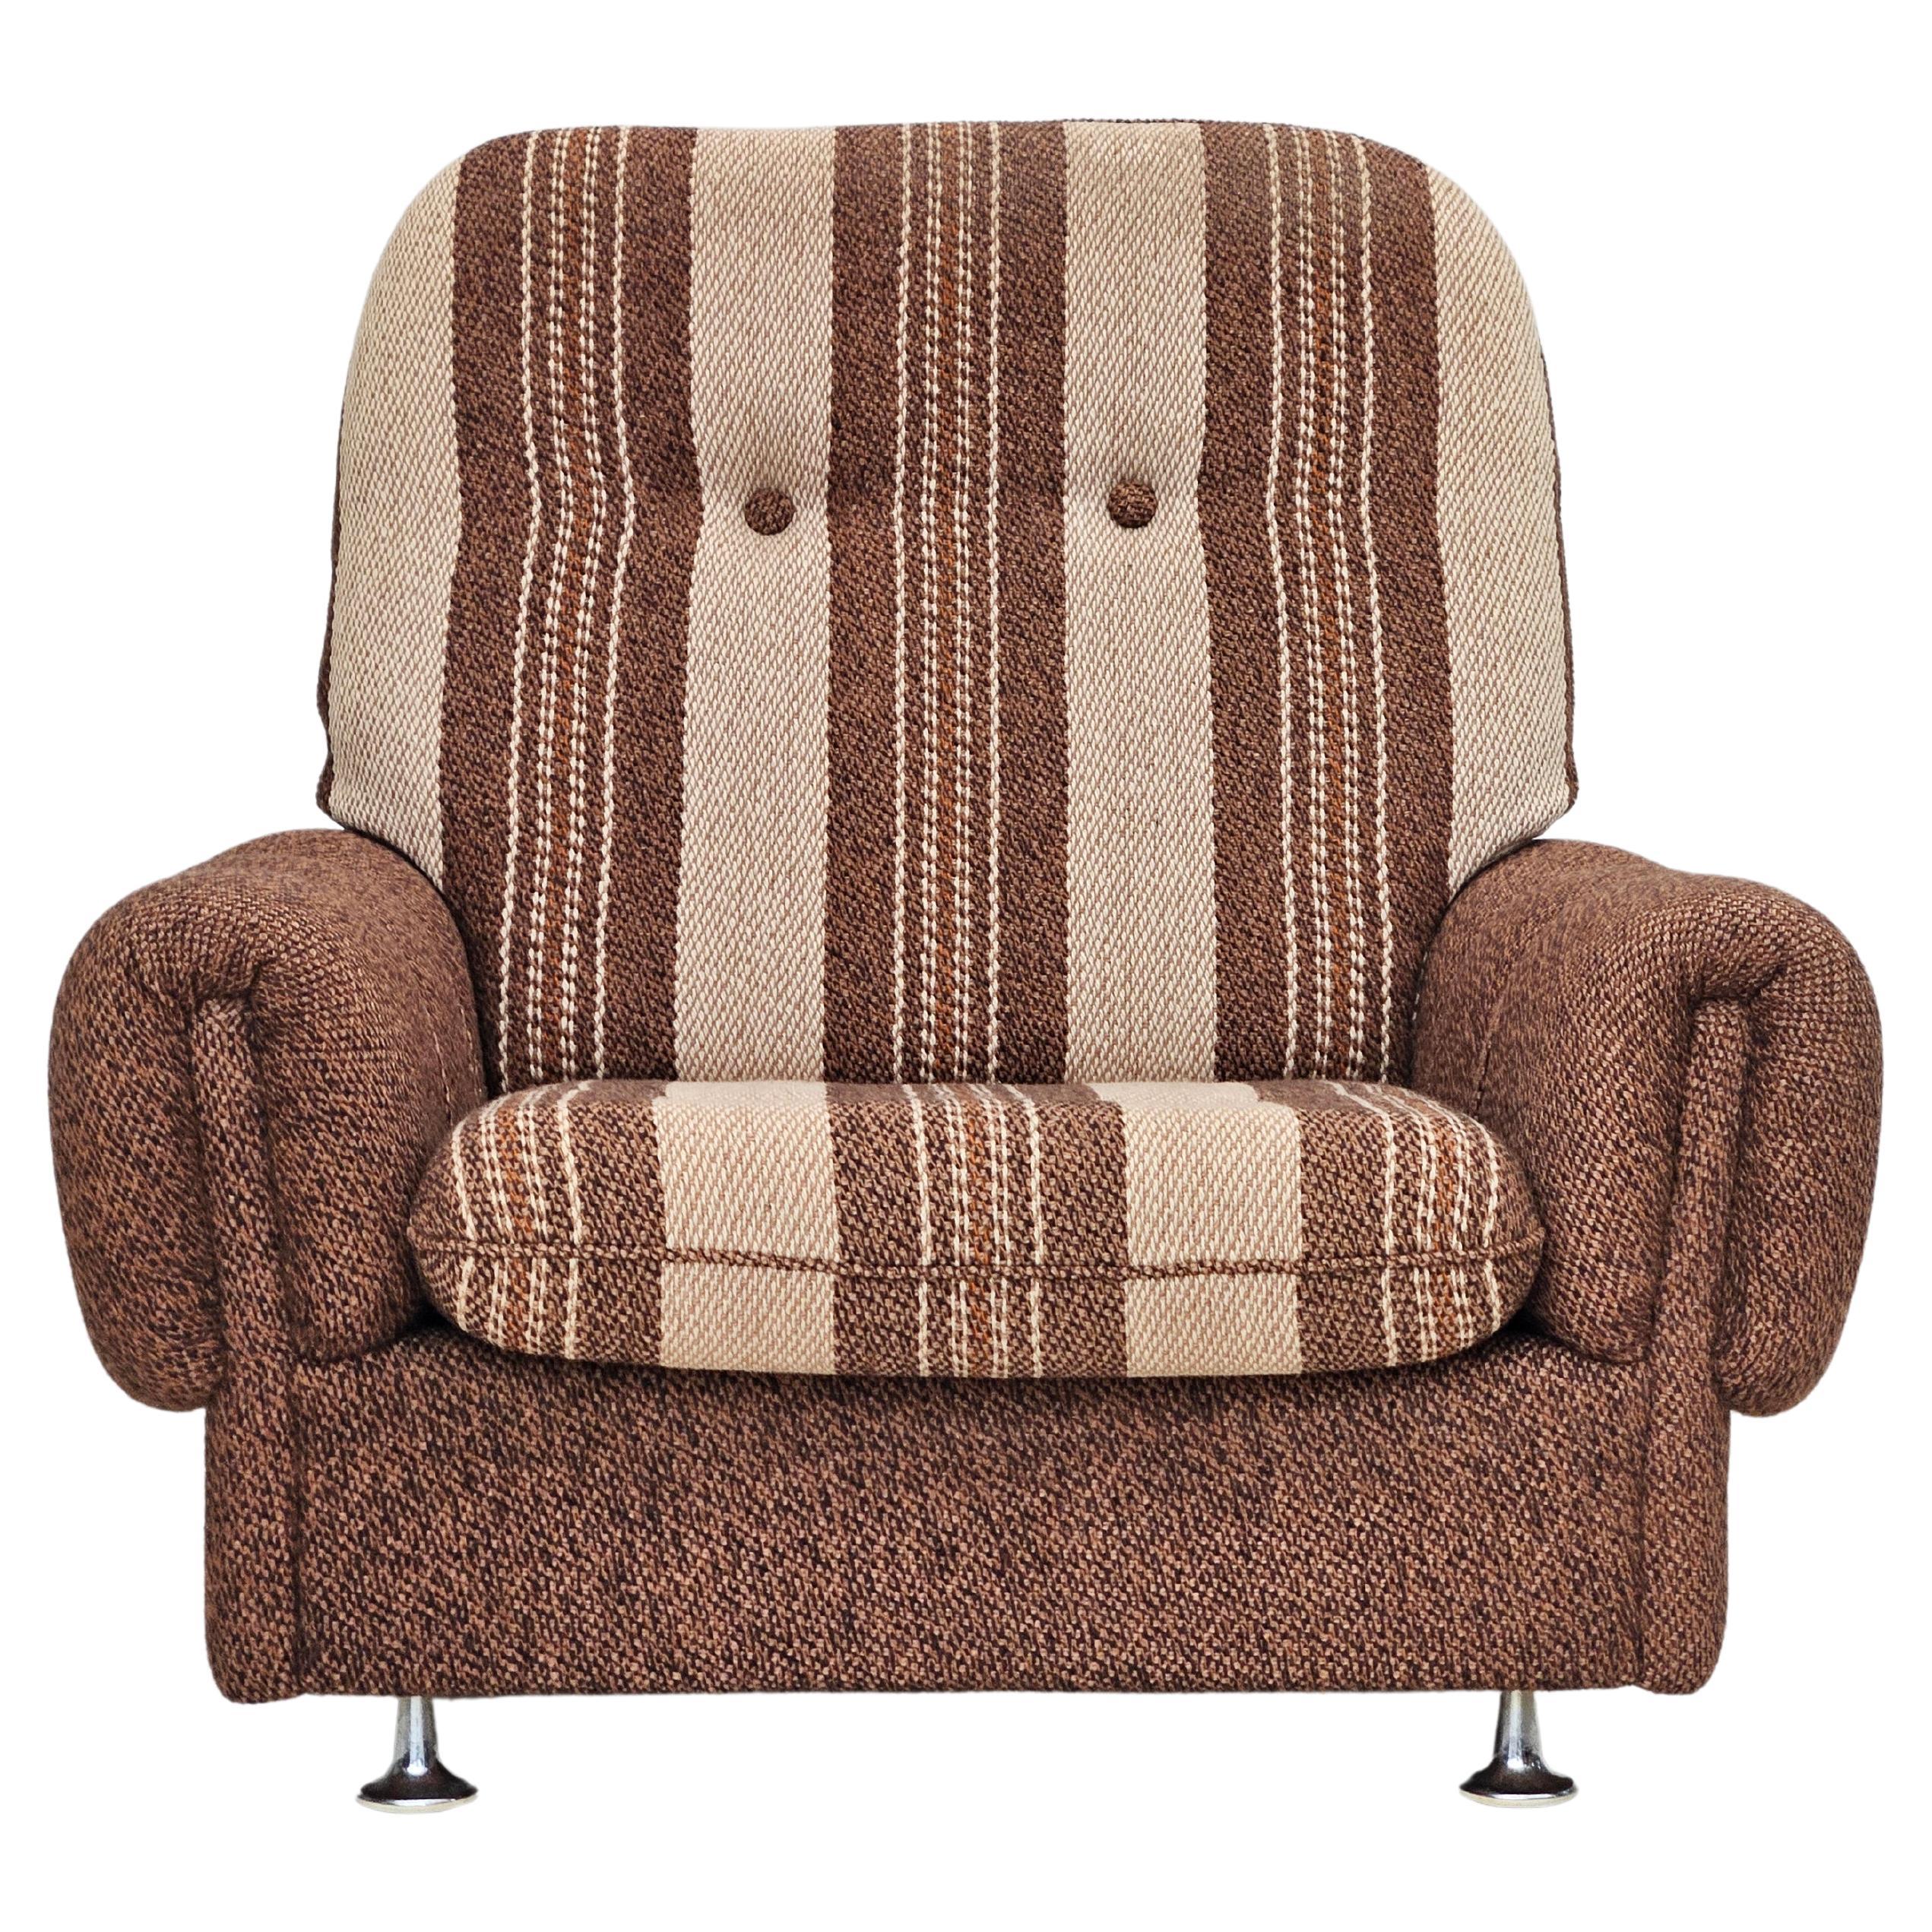 1970s, Danish relax chair, original wool upholstery, very good condition. For Sale